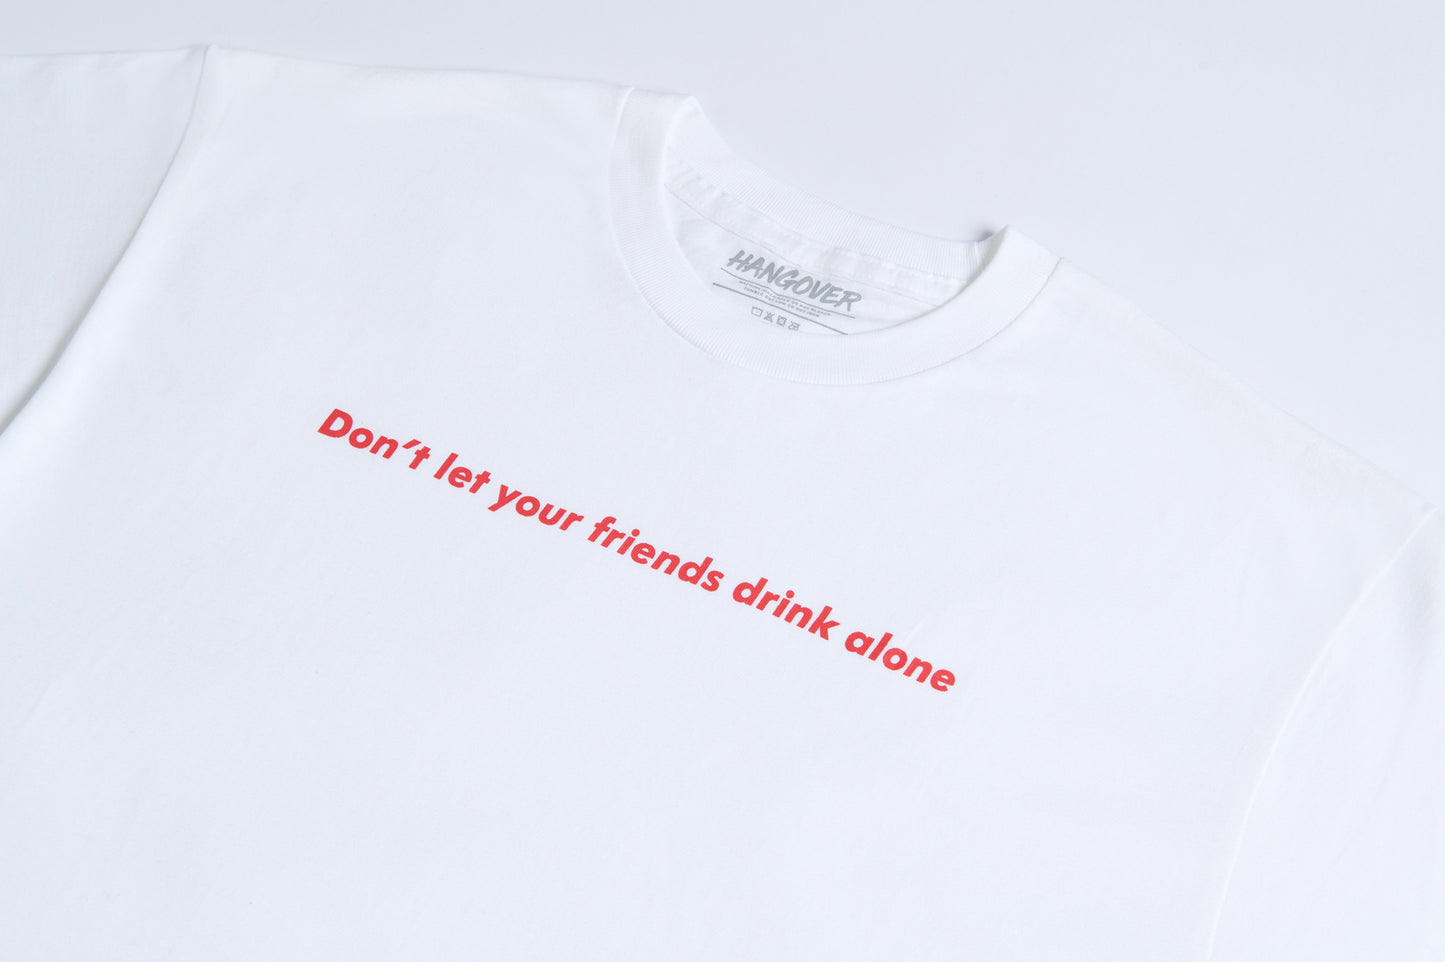 DON'T LET YOUR FRIENDS DRINK ALONE - WHITE